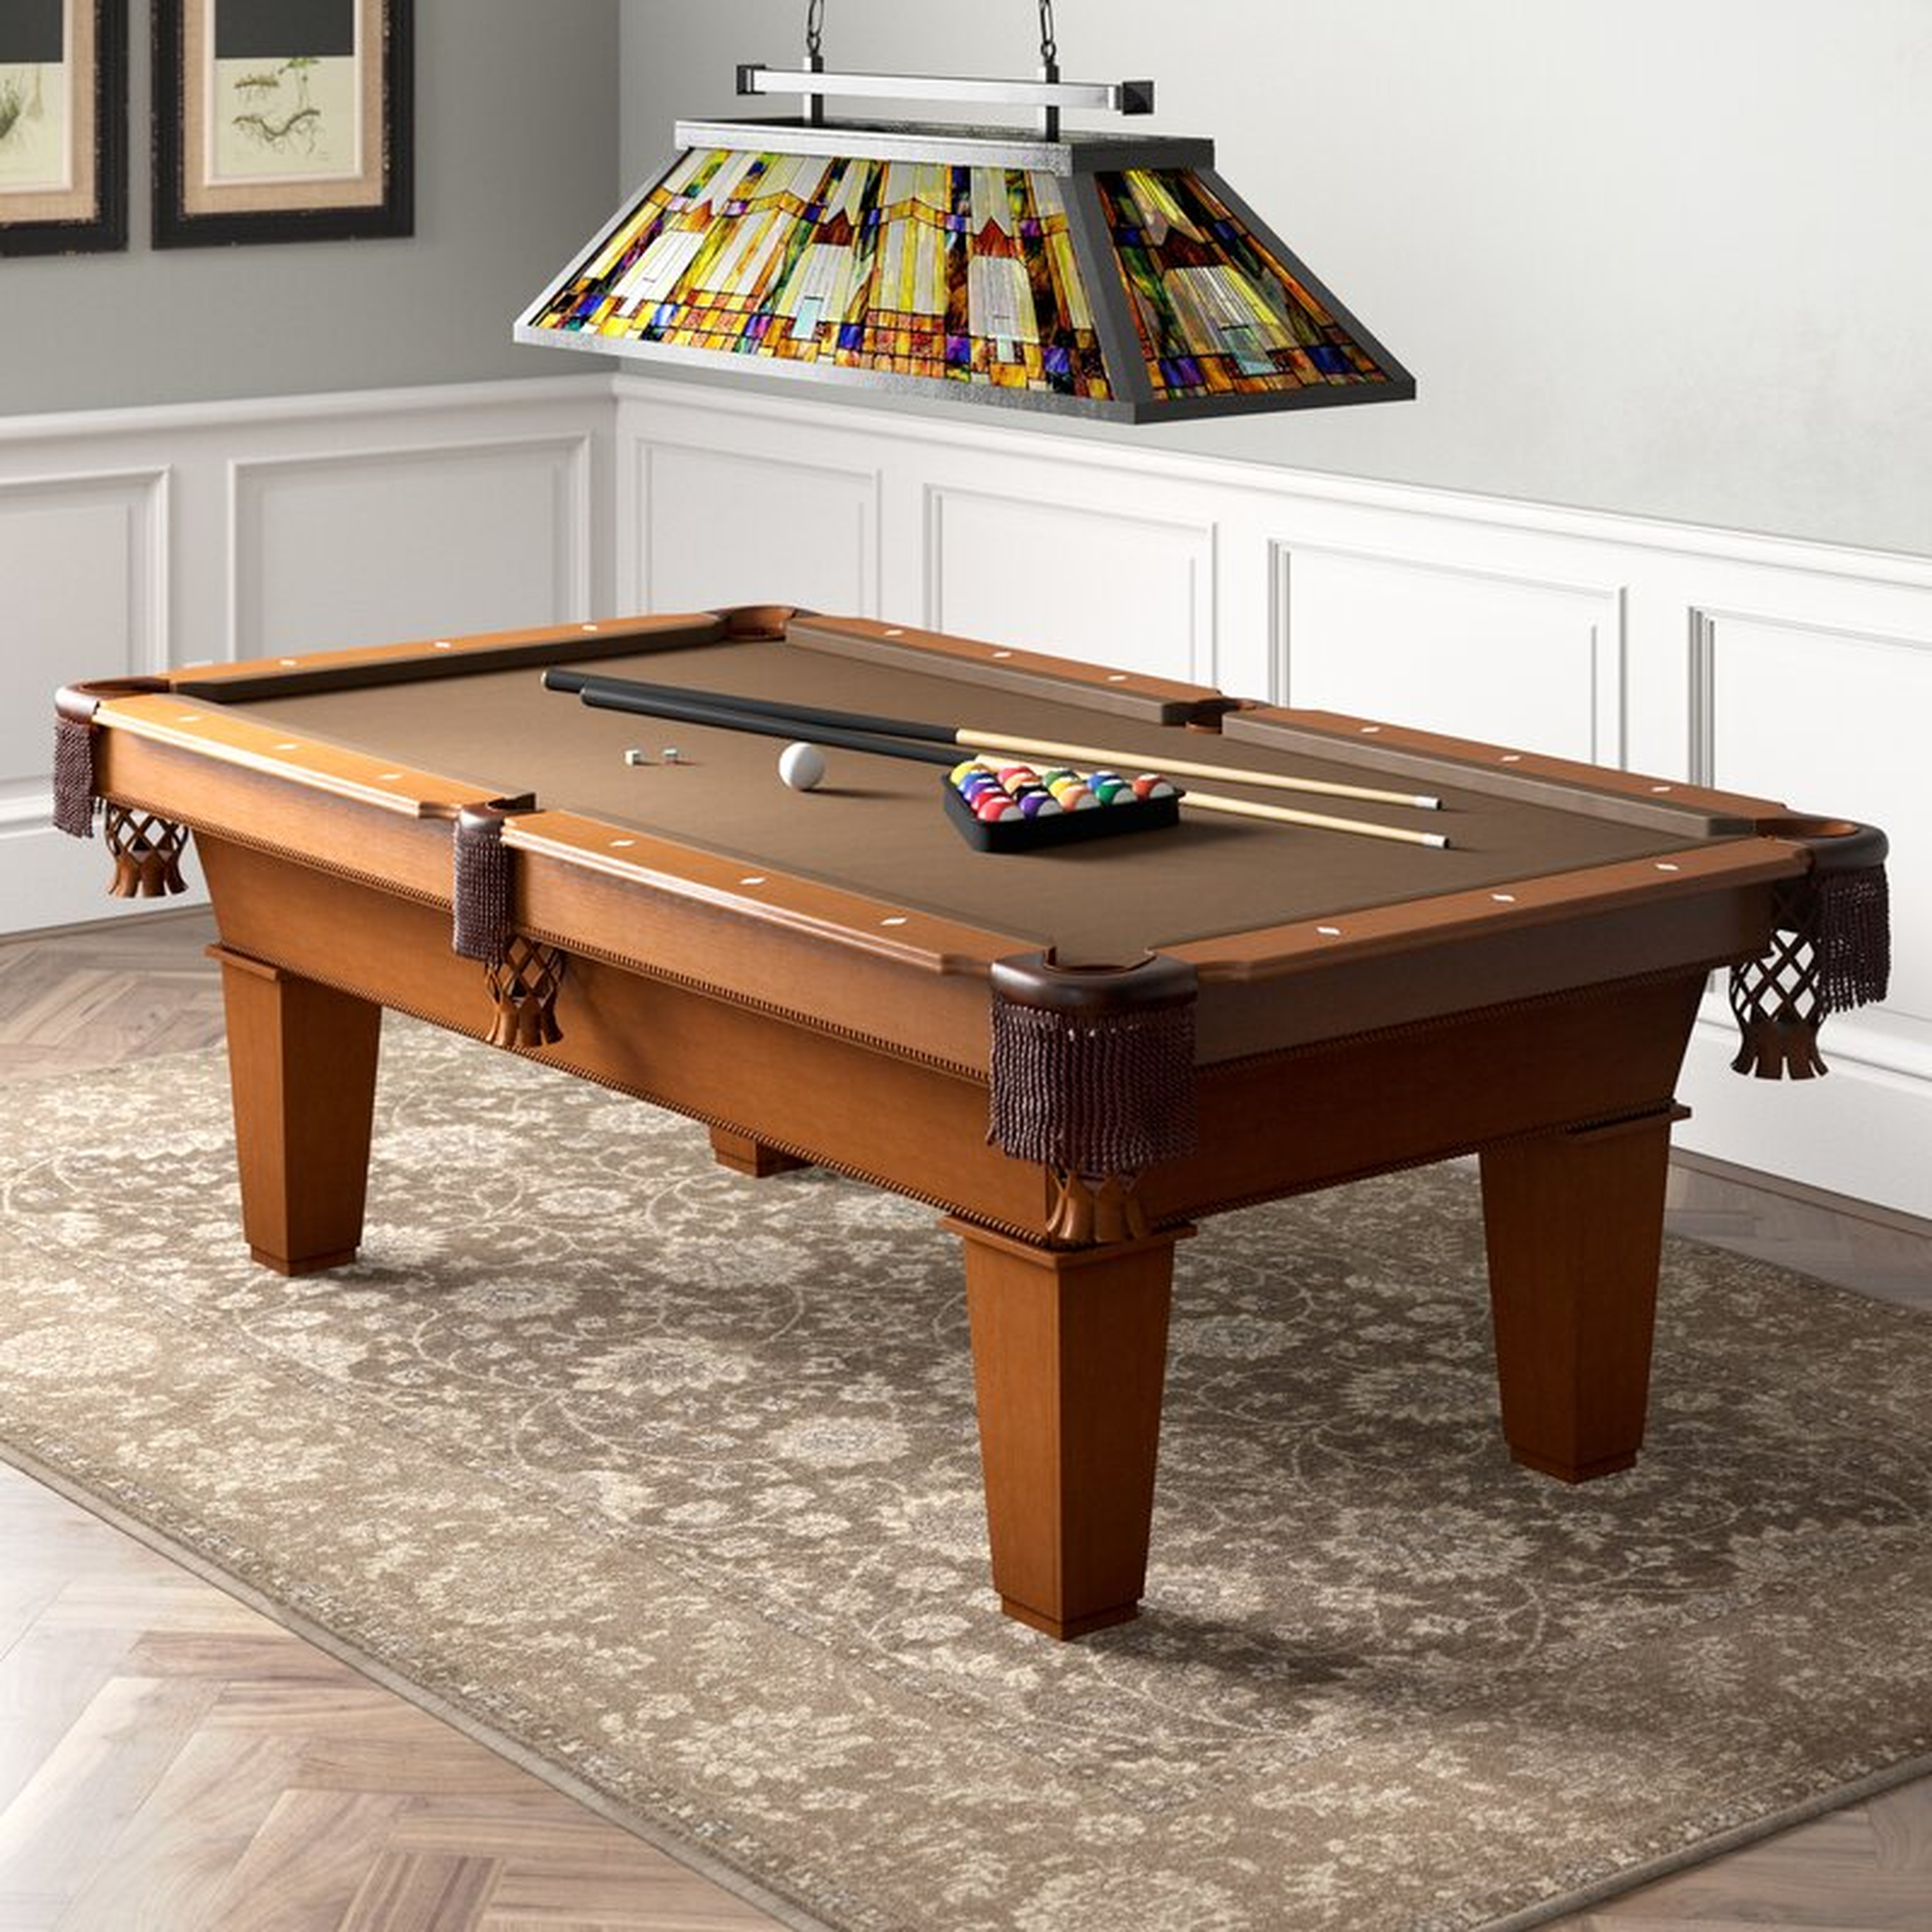 Fat Cat Frisco 7.5' Pool Table with Accessories - Wayfair